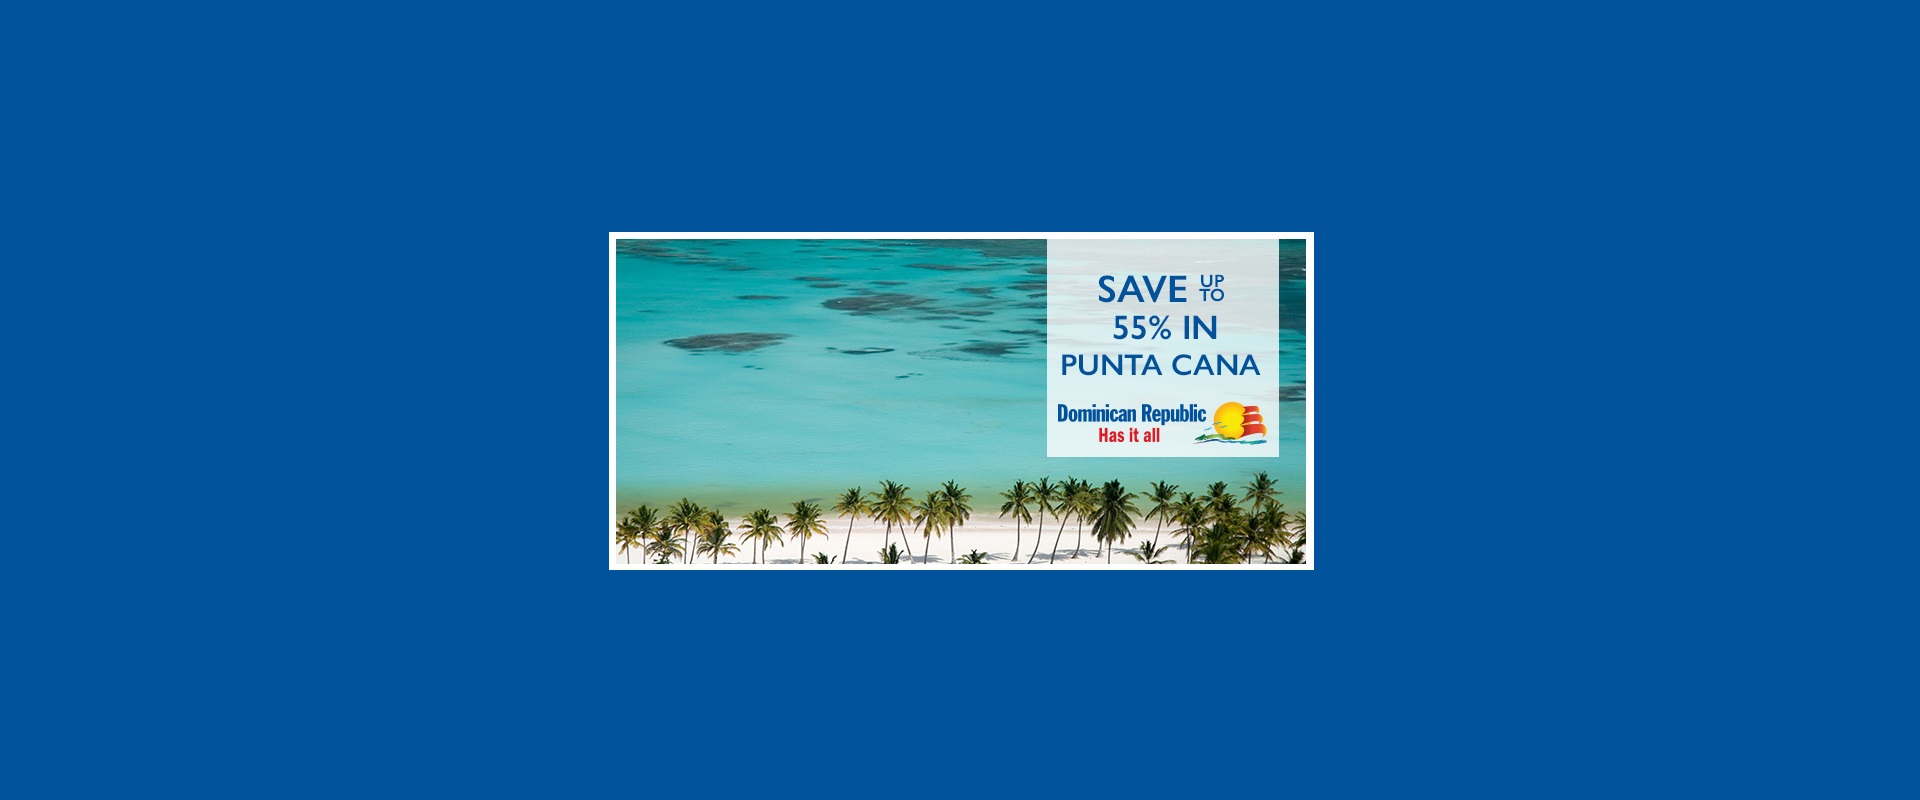 Punta Cana Offer